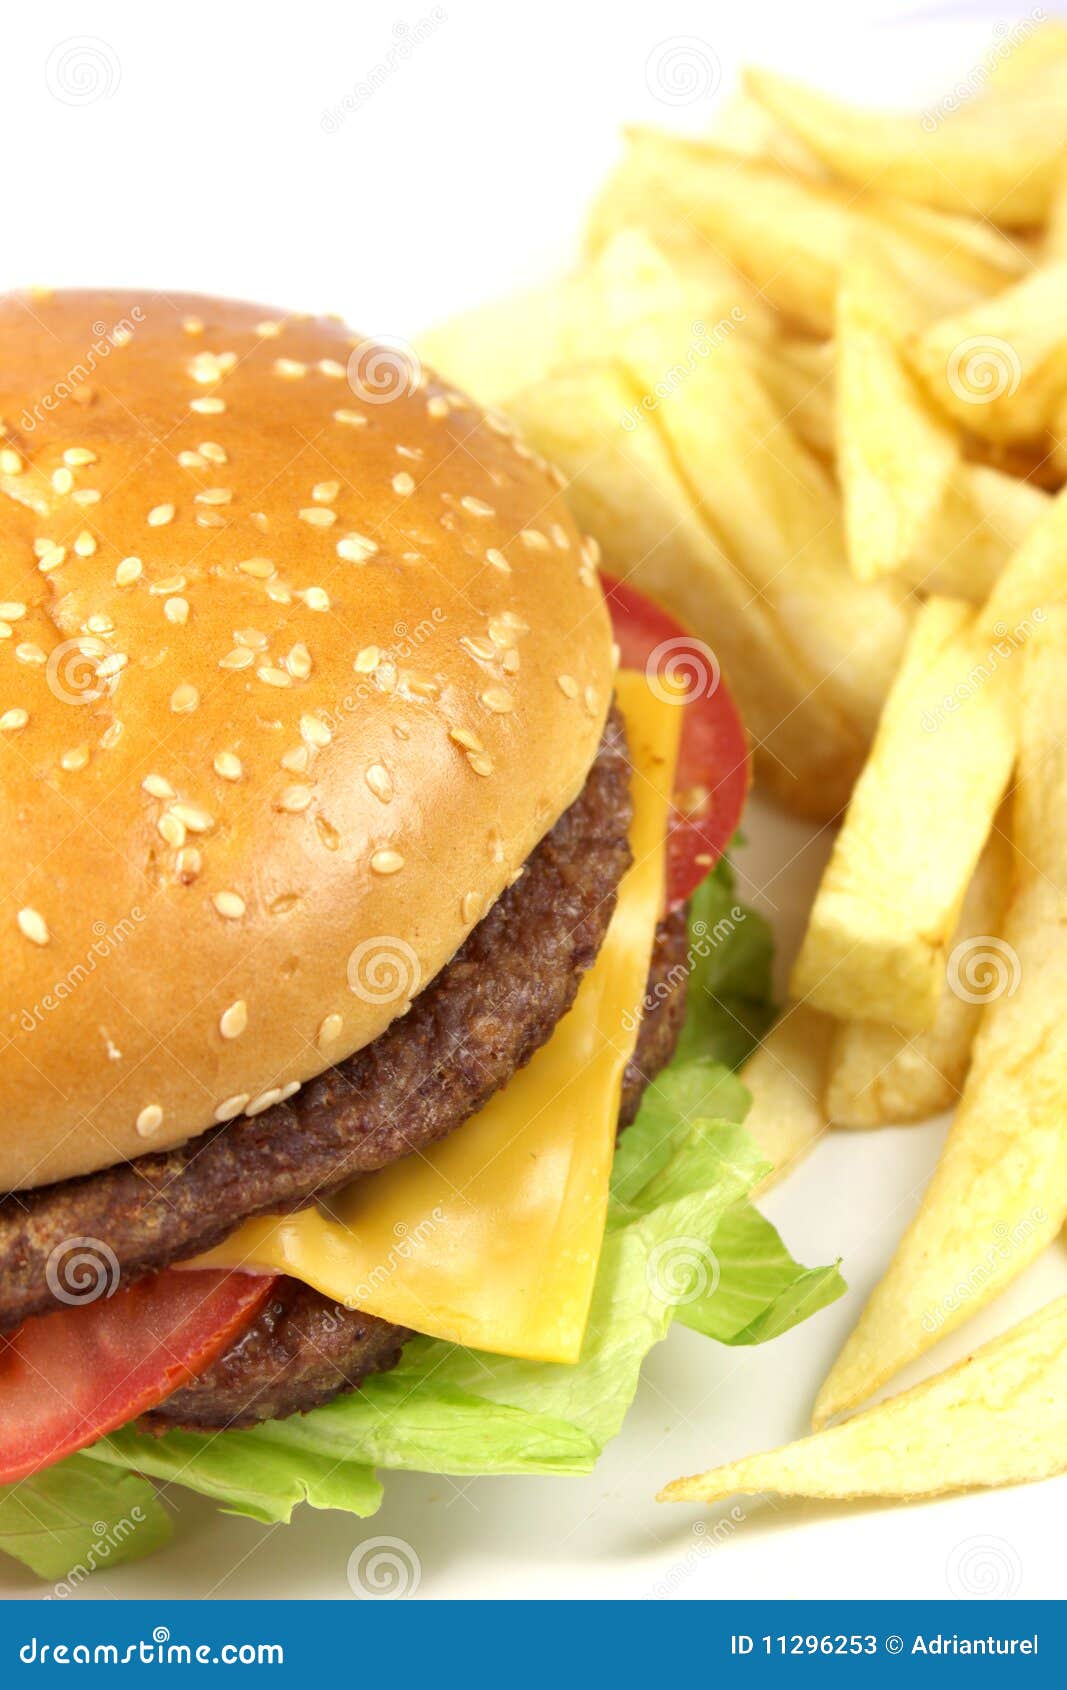 double cheese burger with chips